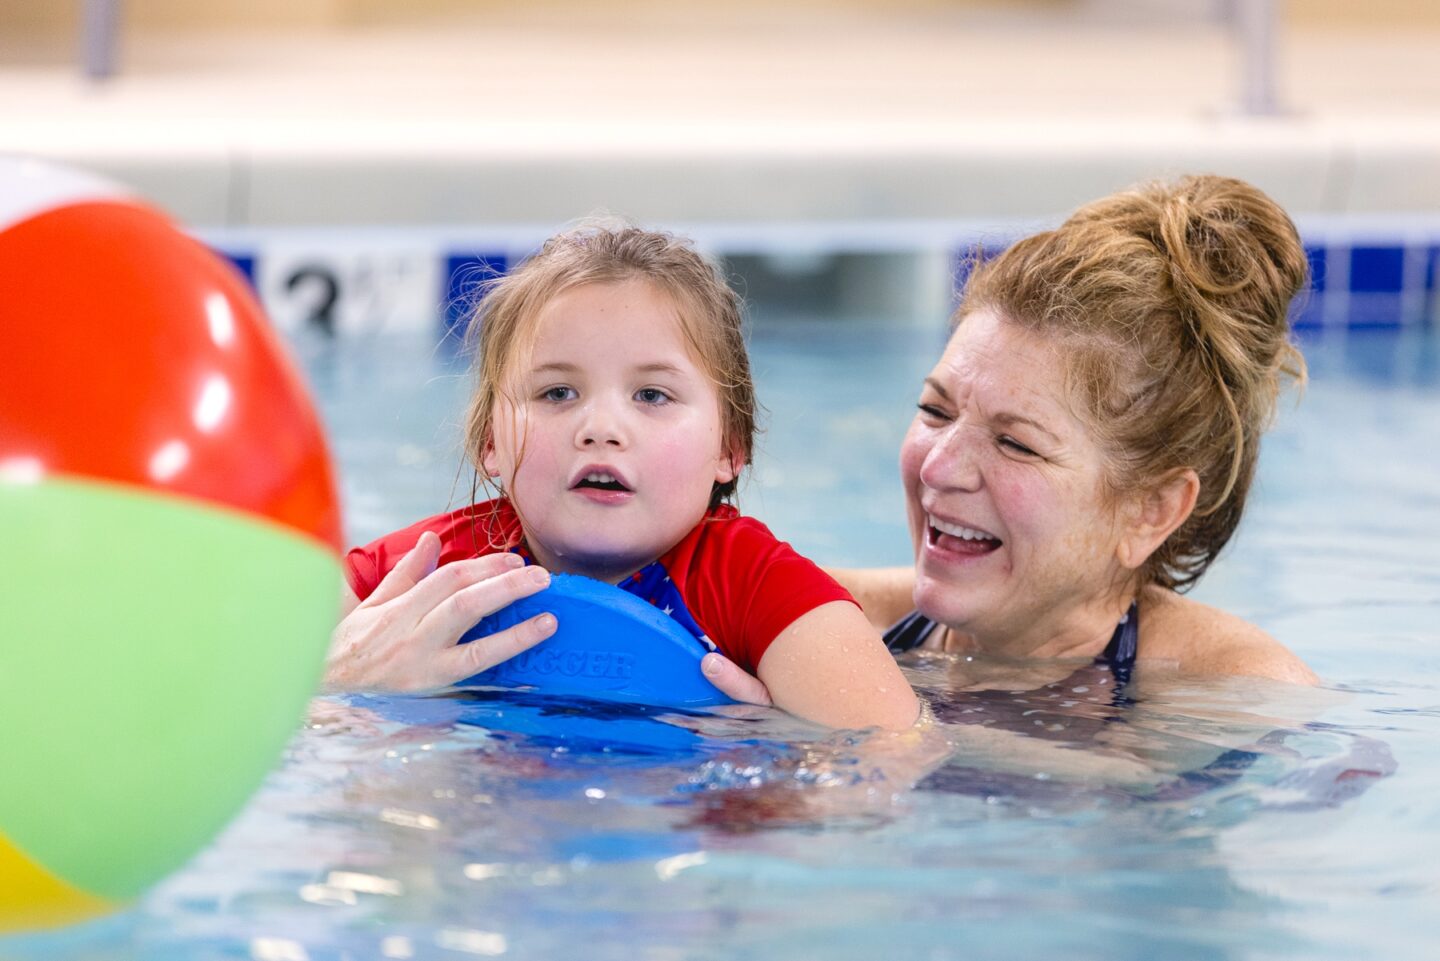 A child and a recreational therapist engage in a fun and supportive pool exercise.